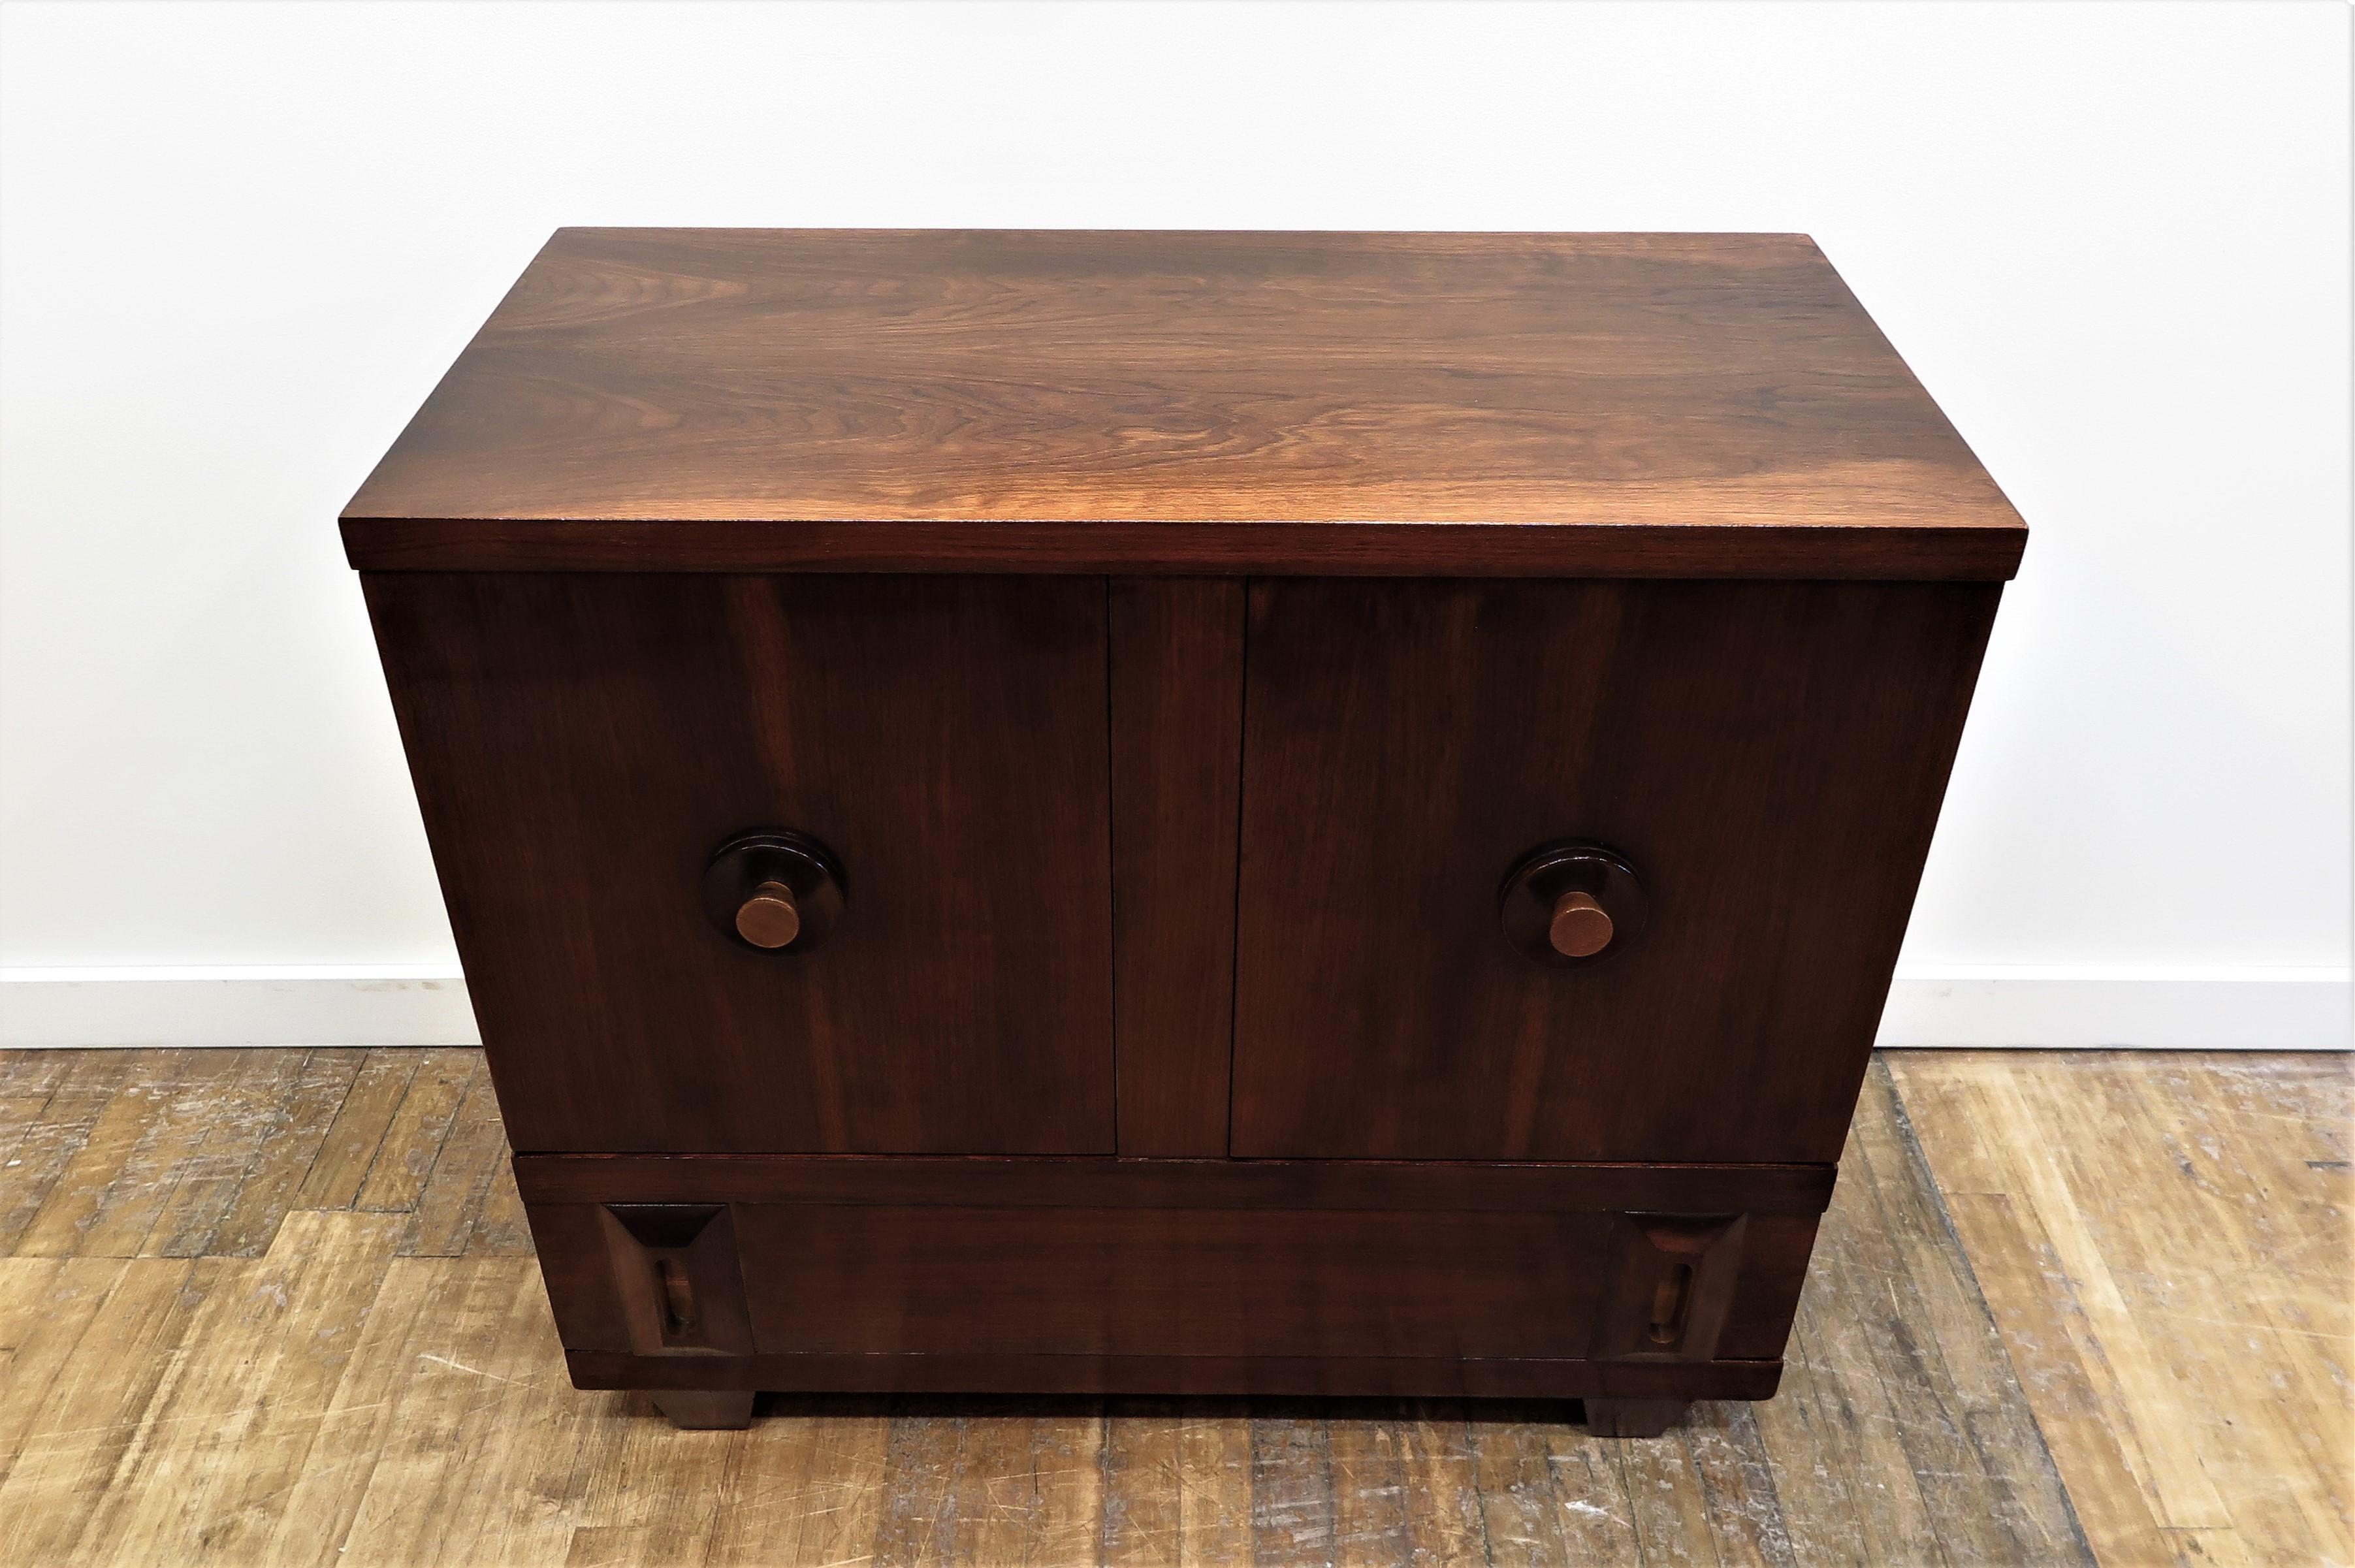 Early midcentury Cabinet, Dry Bar, Credenza, bedside Cabinet, nightstand. This beautiful 1950s American midcentury Cabinet is a very useable Size and configuration. Made of Walnut by American of Martinsville. This piece is of the early period 1950s